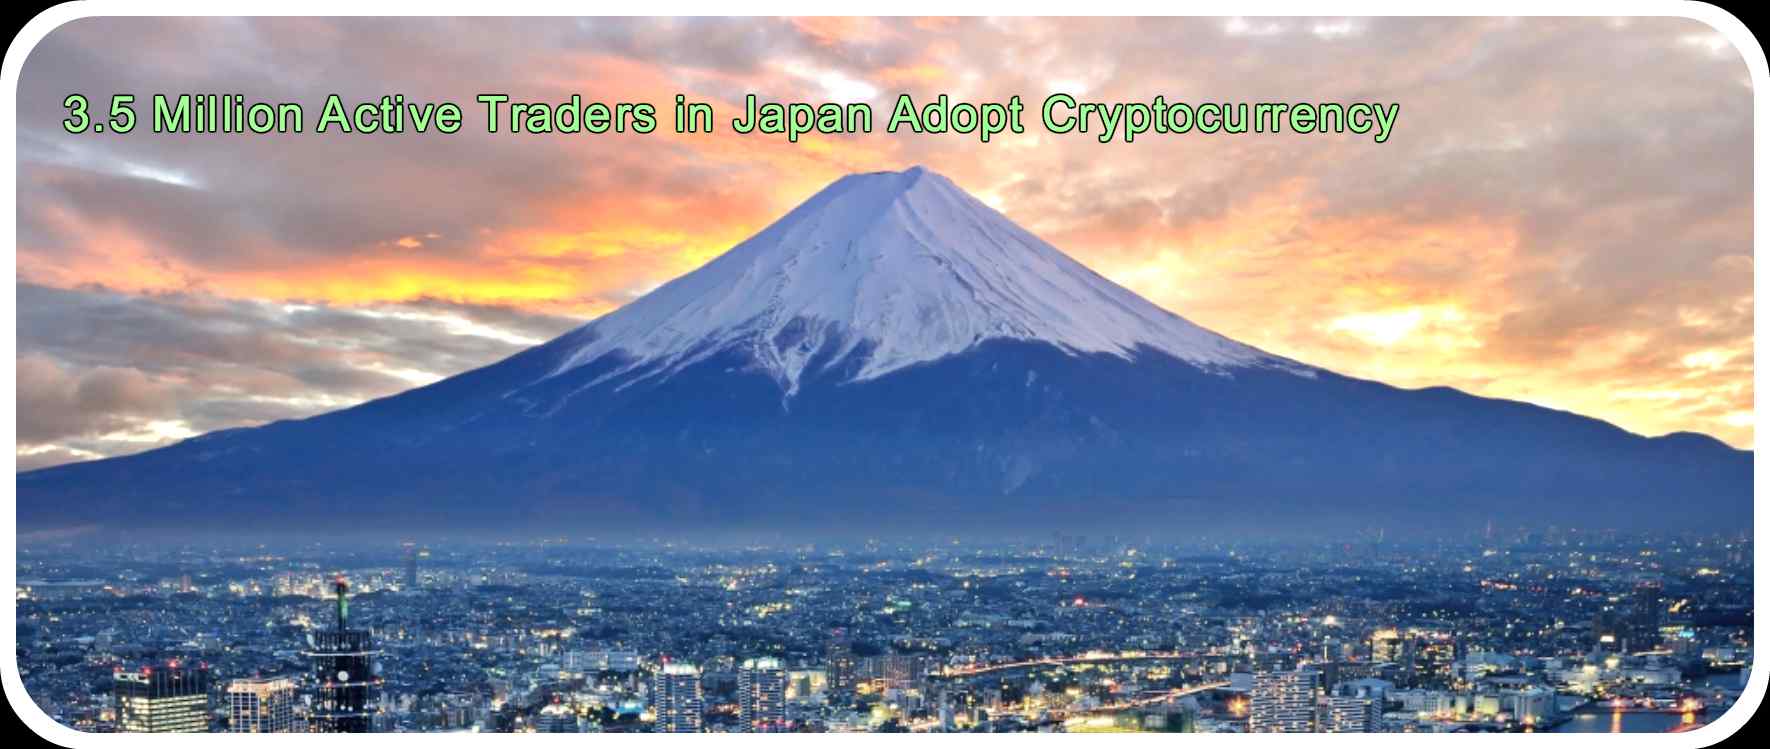 CRYPTONEWSBYTES.COM 3.5-Million-Active-Traders-in-Japan-Adopt-Cryptocurrency 3.5 Million Active Traders in Japan Adopt Cryptocurrency, Future of Global Cryptomarket Looks Bright  